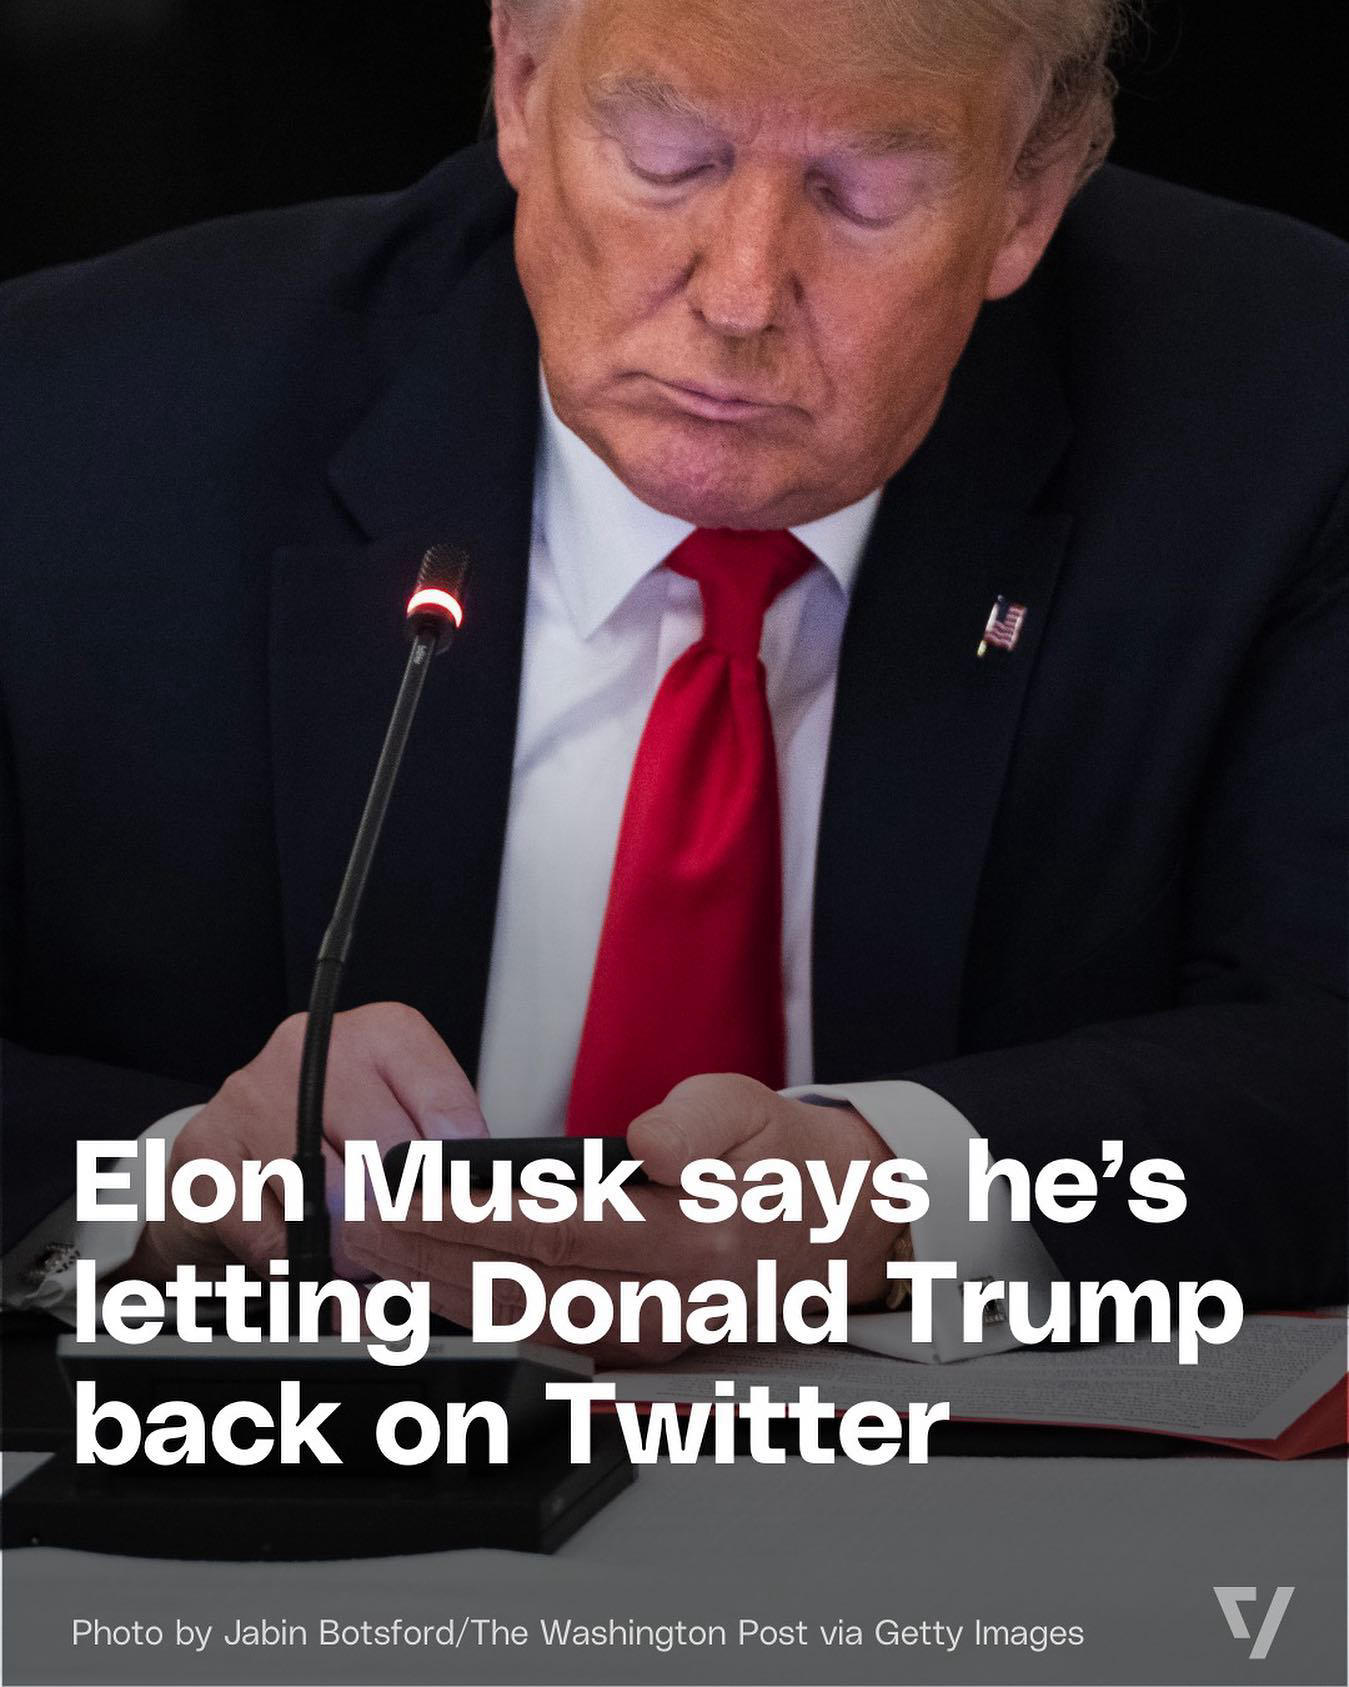 The Verge - Donald Trump is allowed to rejoin Twitter, Elon Musk has announced